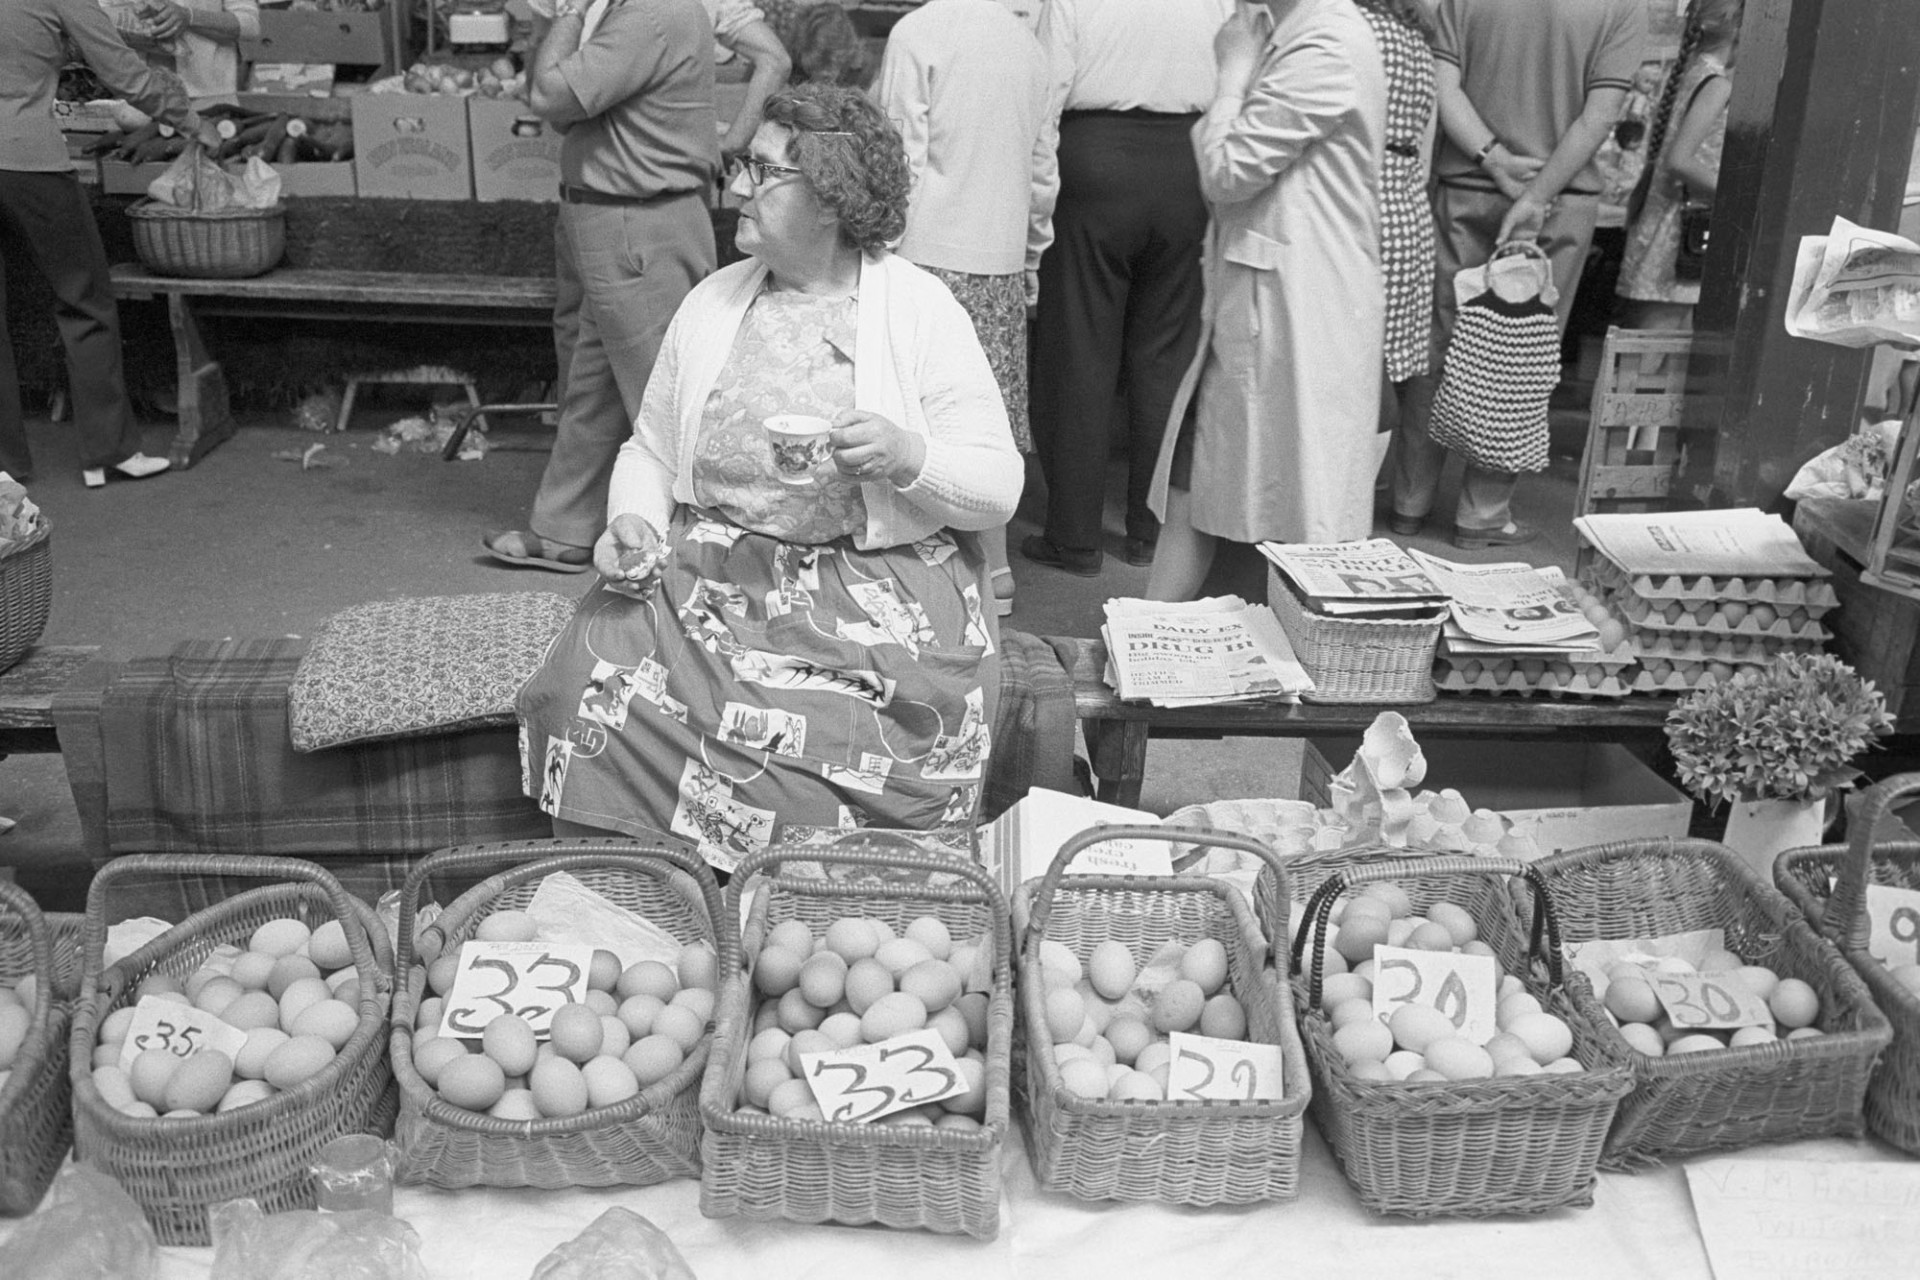 Mrs Pickard's poultry stall Pannier Market.
[Mrs Pickard drinking tea and selling eggs from wicker baskets at Barnstaple Pannier Market. The eggs are priced.]